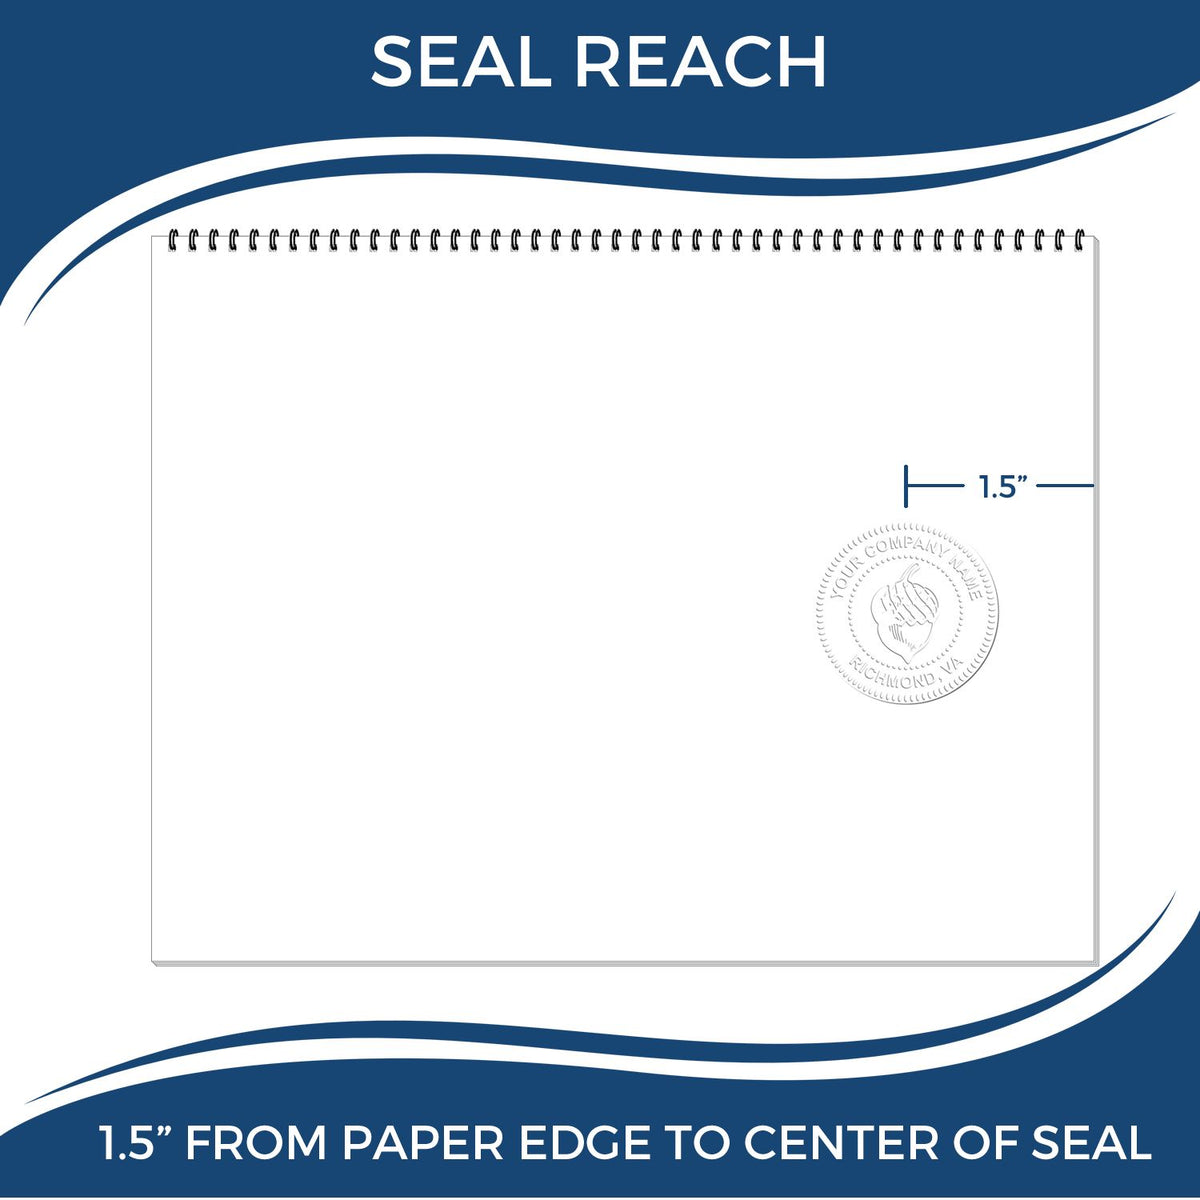 An infographic showing the seal reach which is represented by a ruler and a miniature seal image of the Hybrid Washington Landscape Architect Seal